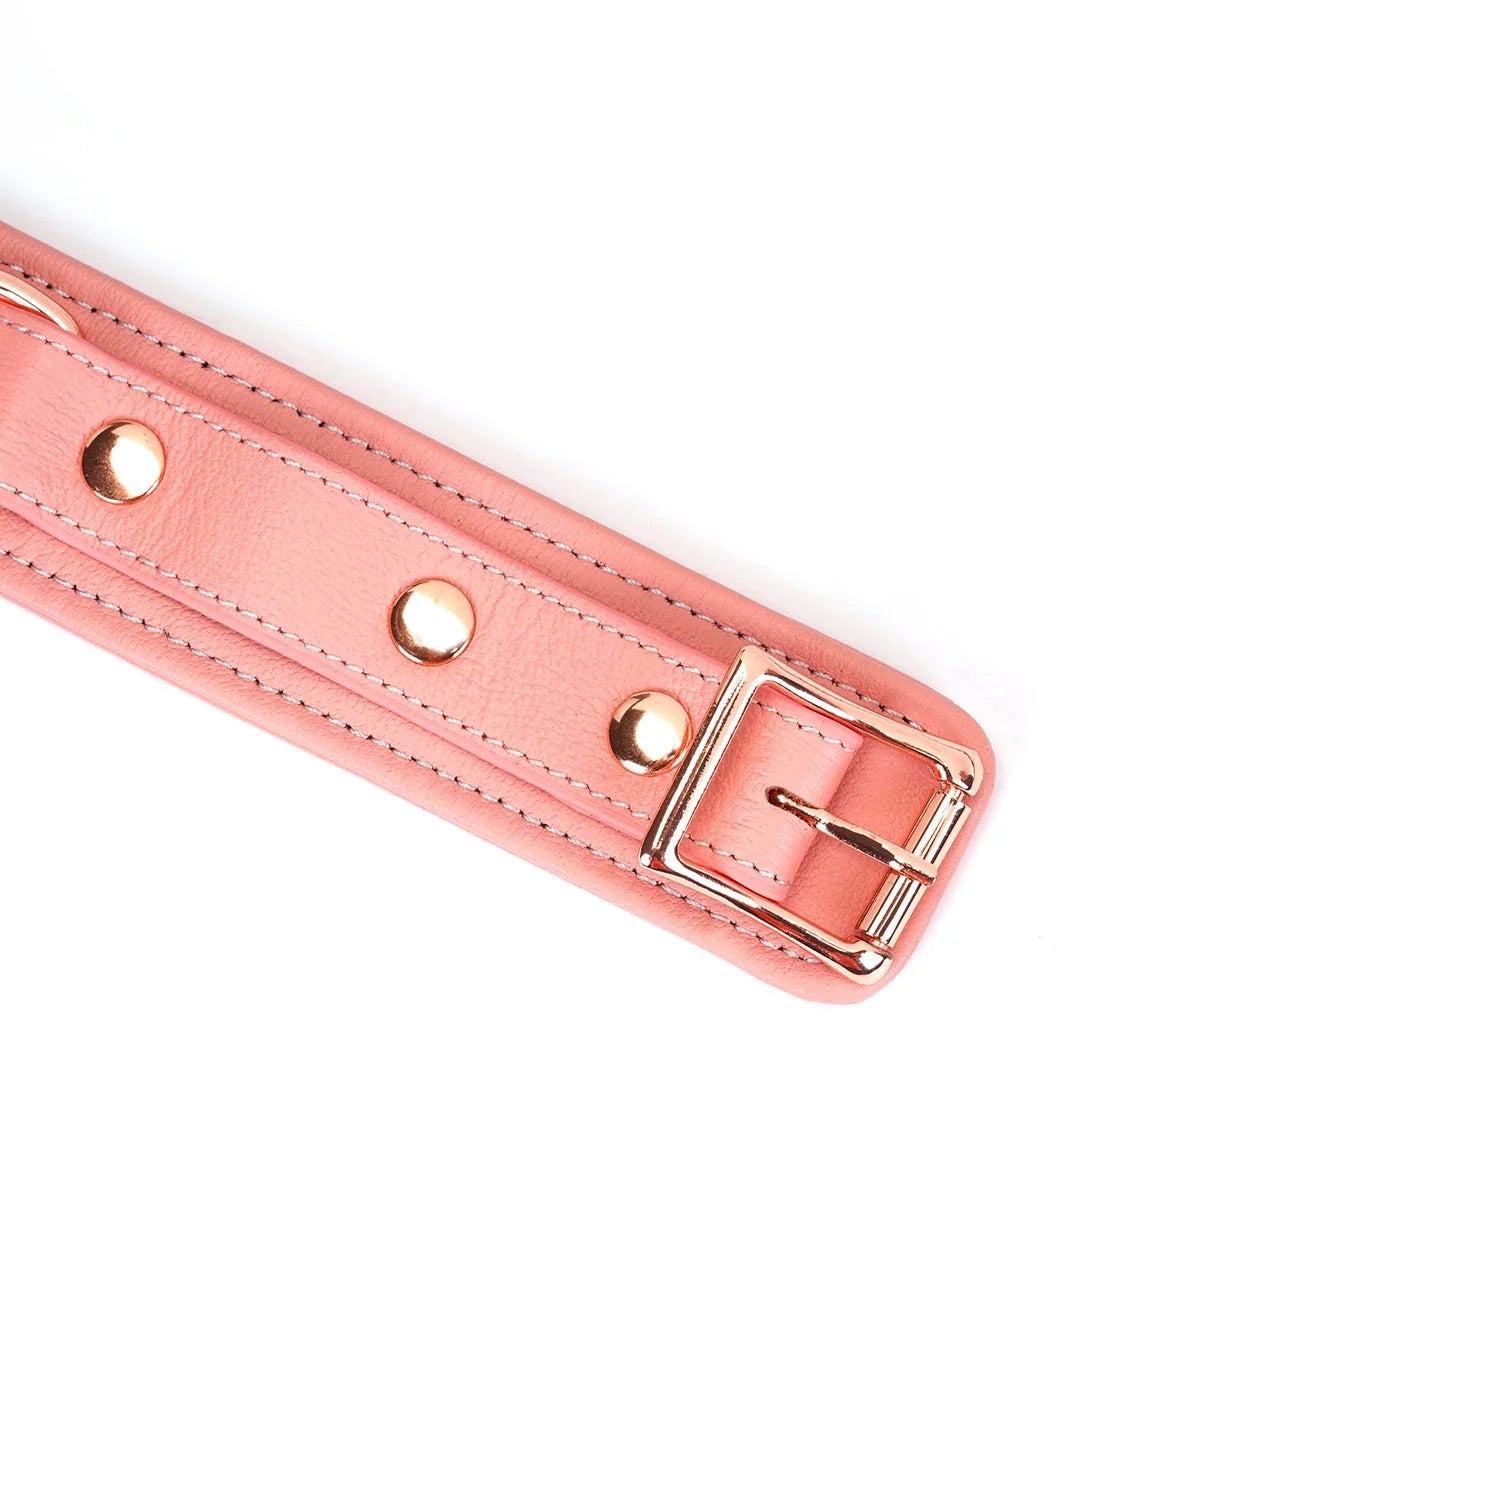  Pink Dream Collar and Leash Kink by Liebe Seele- The Nookie